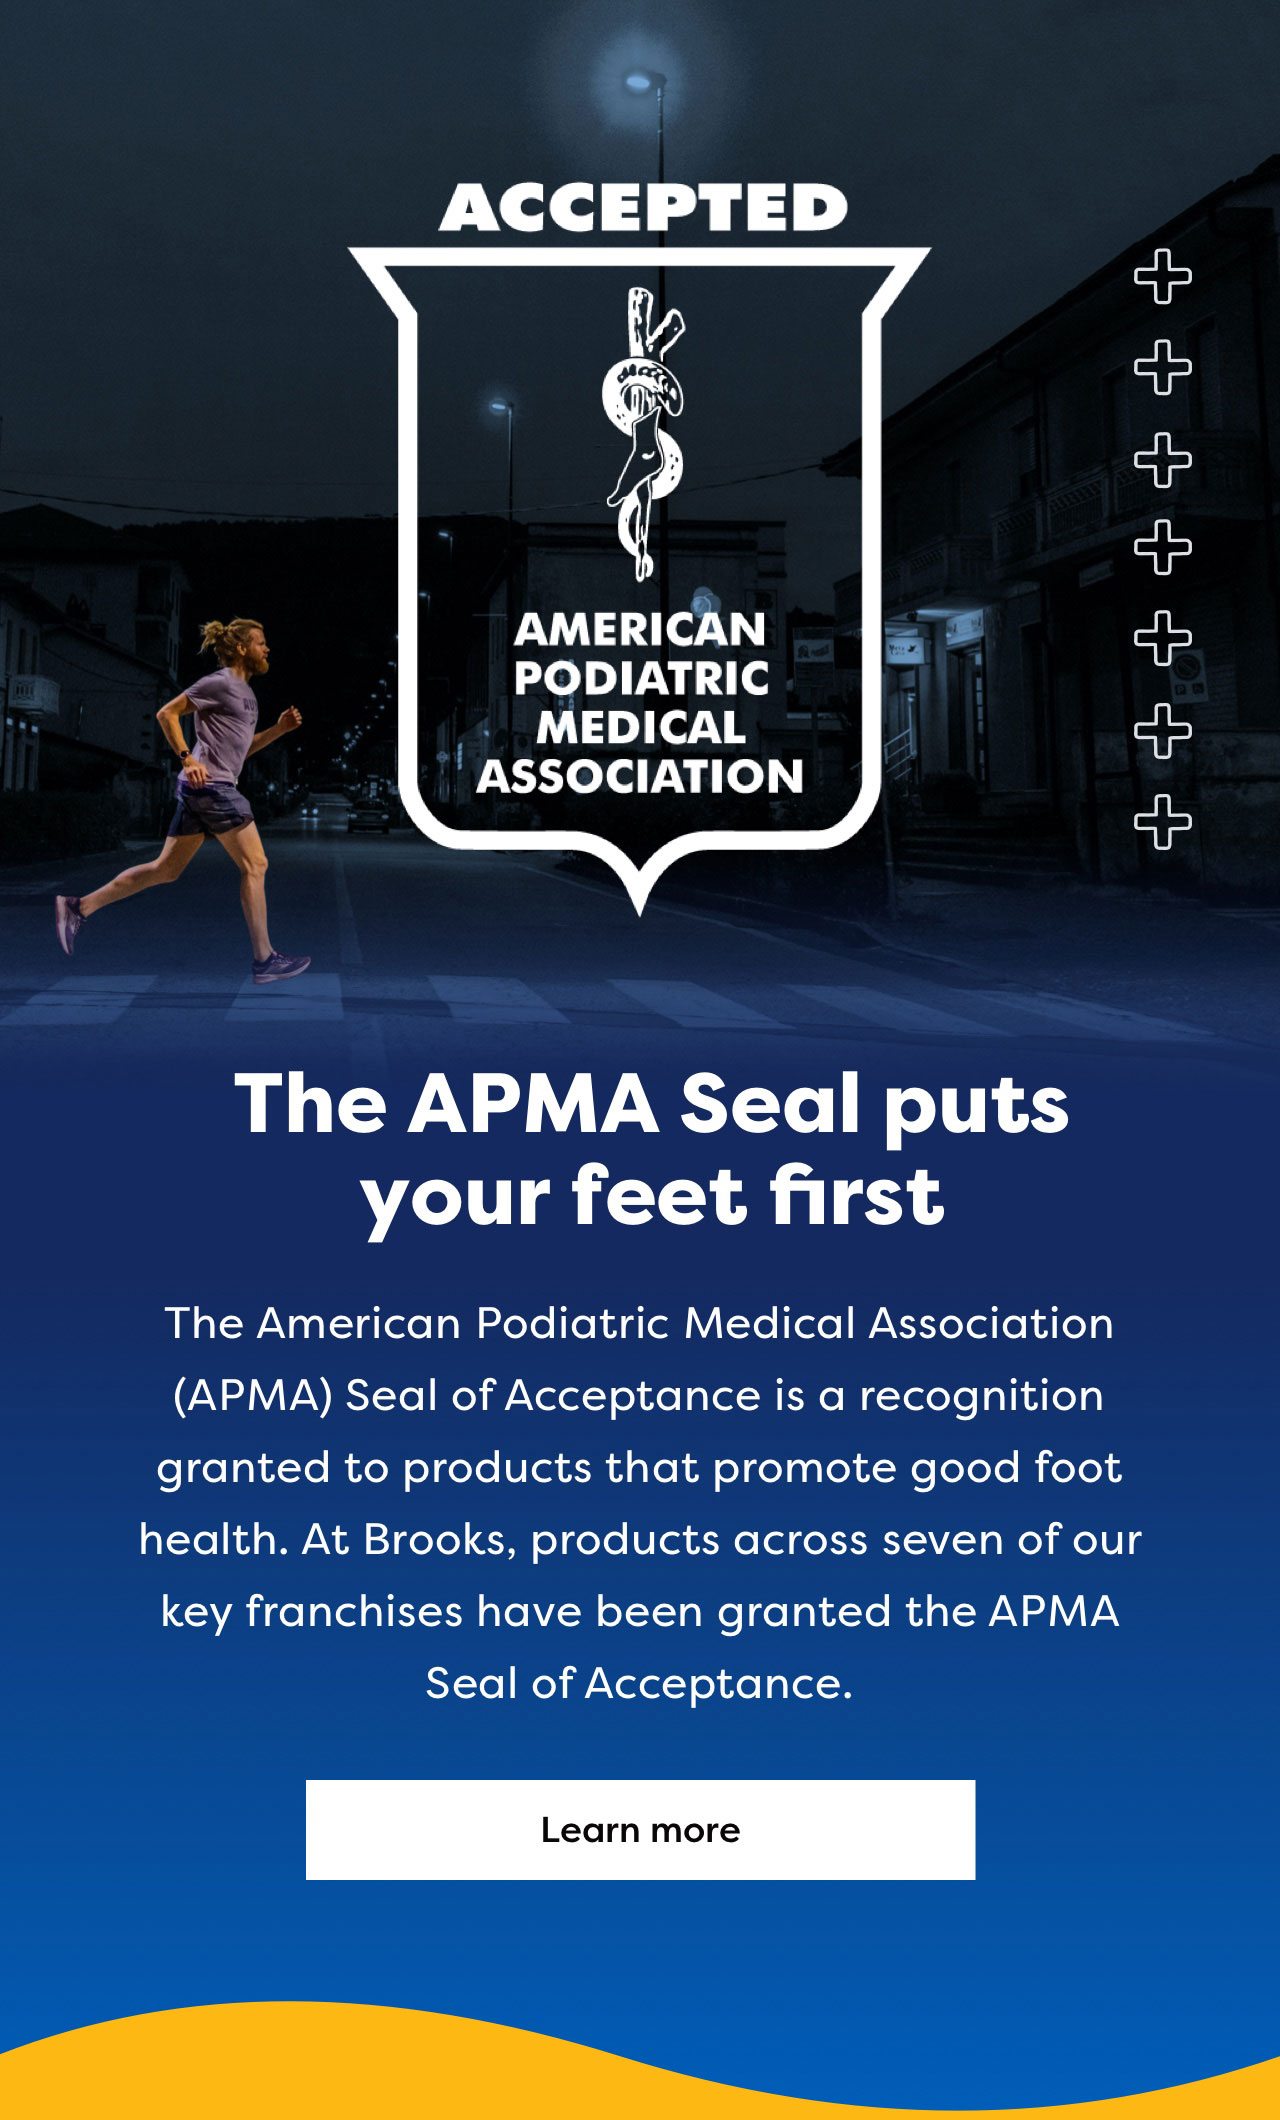 The APMA Seal puts your feet first | The American Podiatric Medical Association (APMA) Seal of Acceptance is a recognition granted to products that promote good foot health. At Brooks, products across seven of our key franchises have been granted the APMA Seal of Acceptance. | Learn more